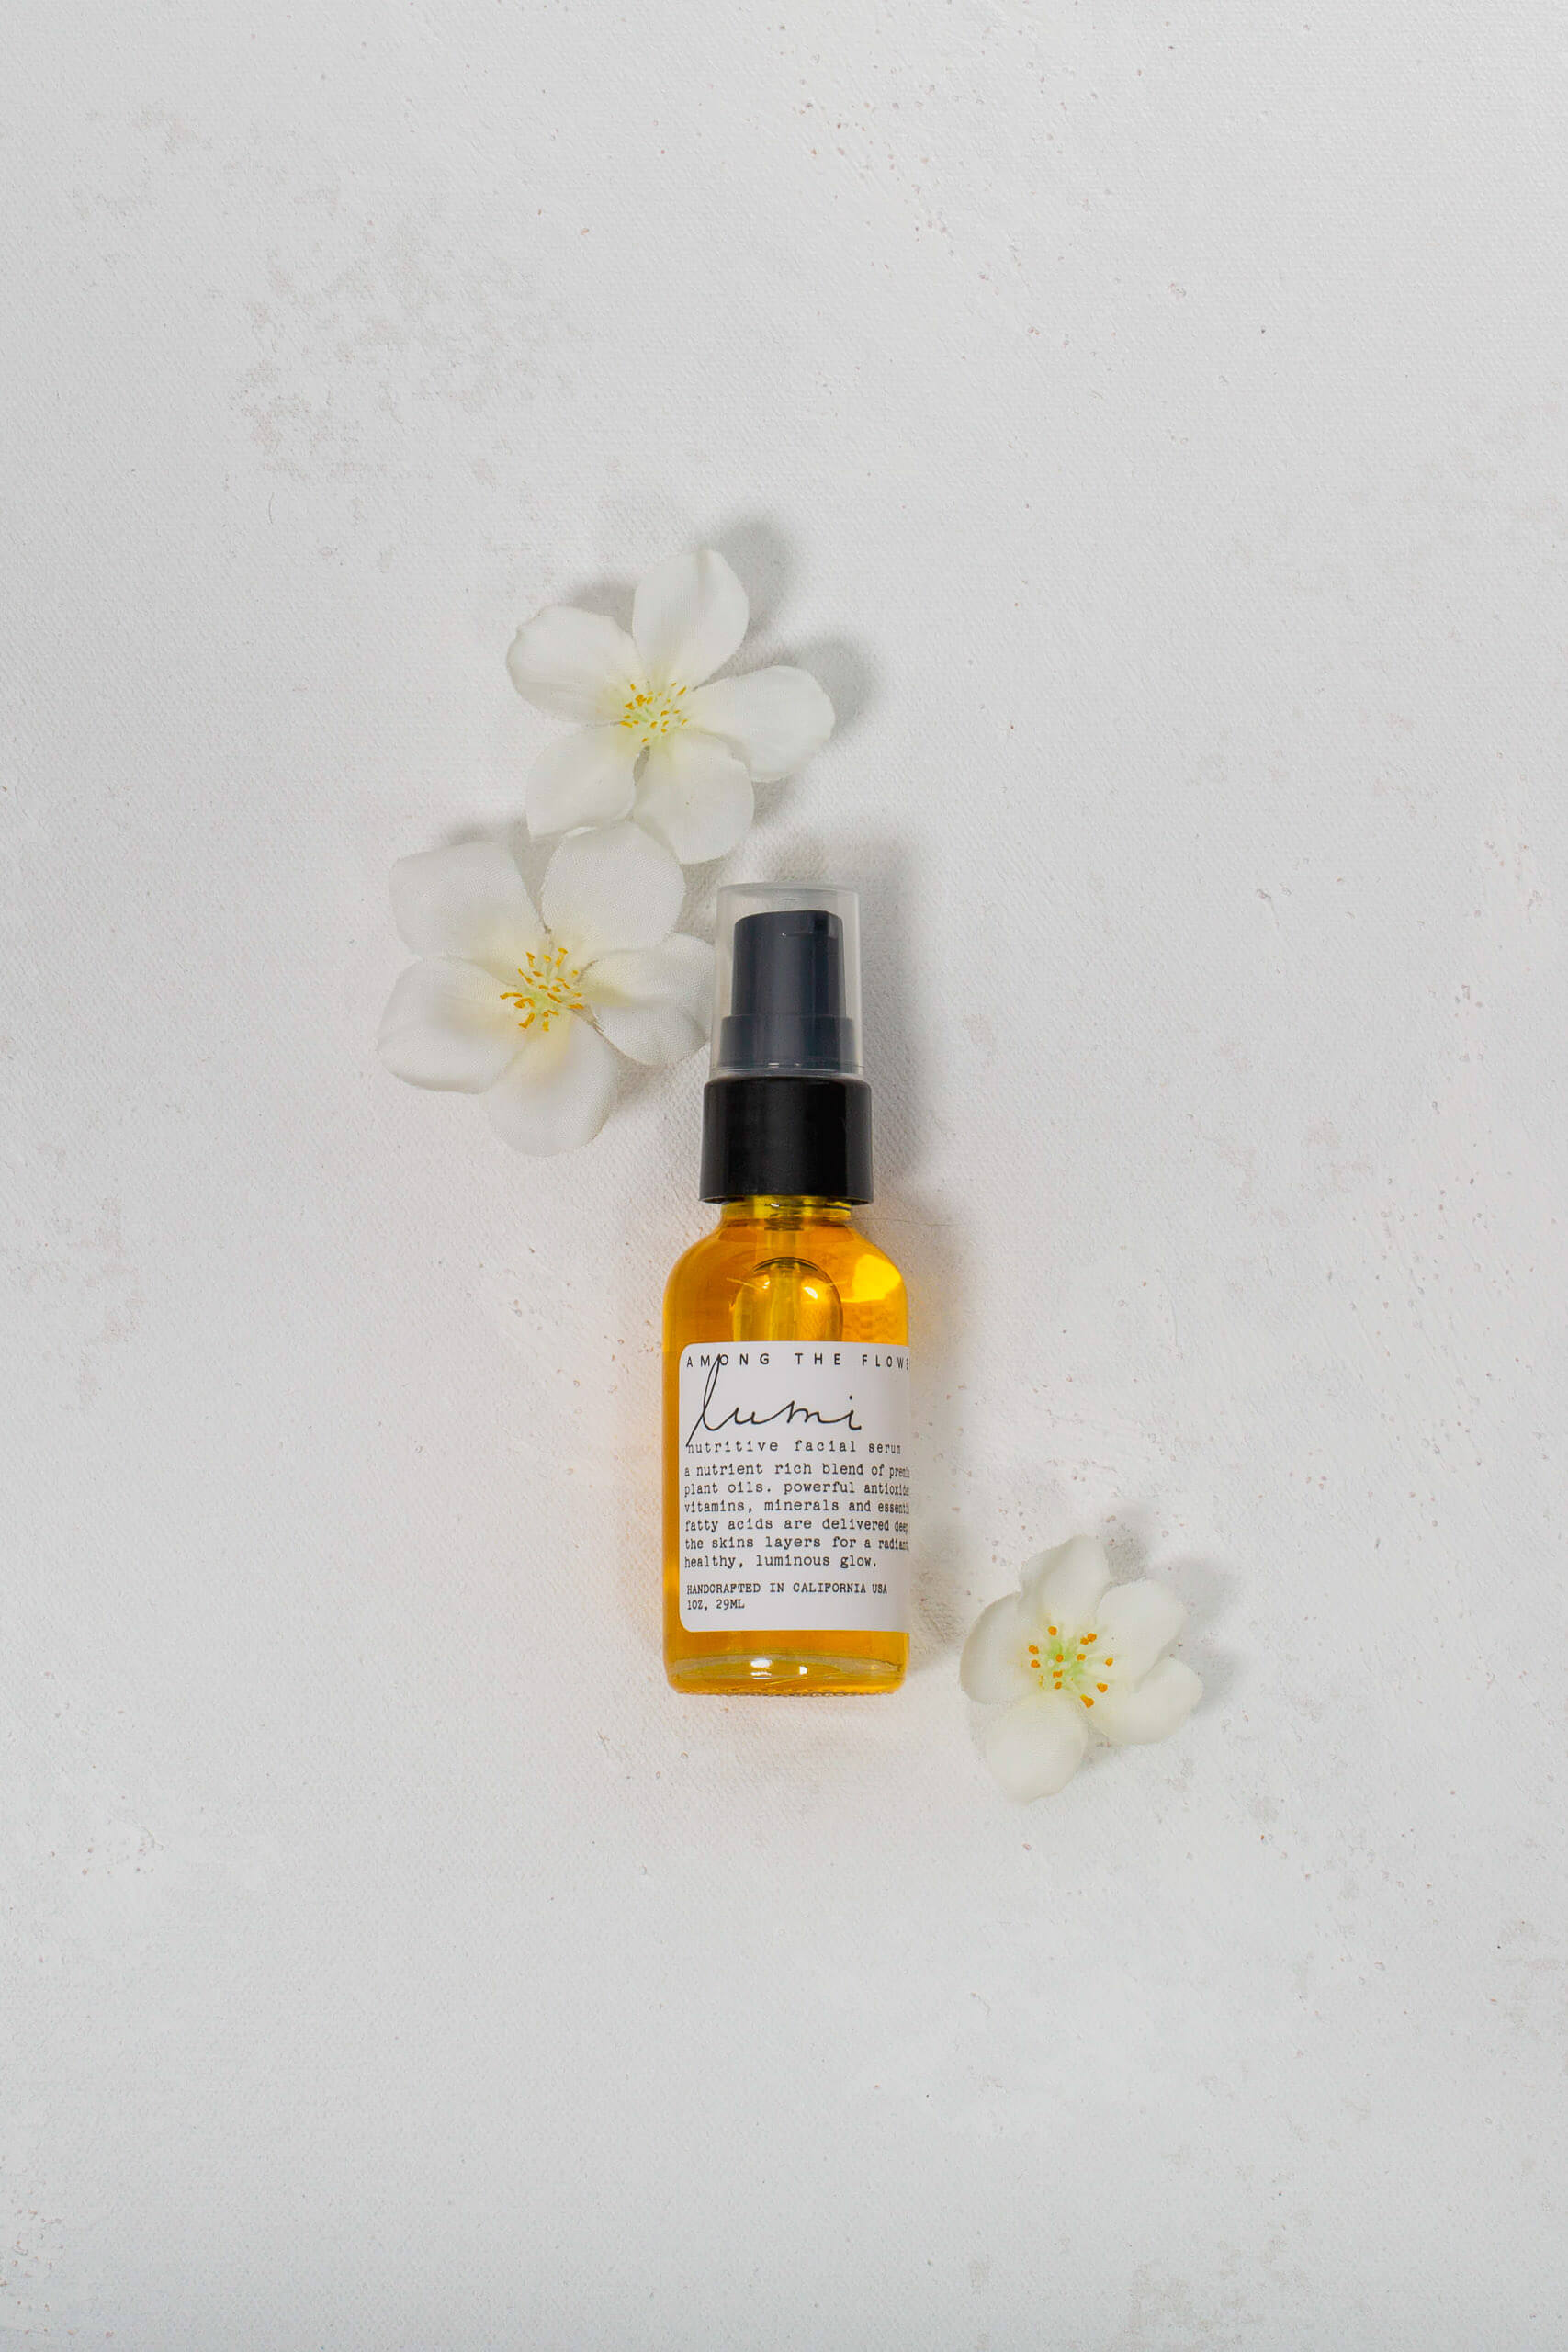 Golden Lumi Facial Serum in clear bottle with black cap surrounded by white flowers